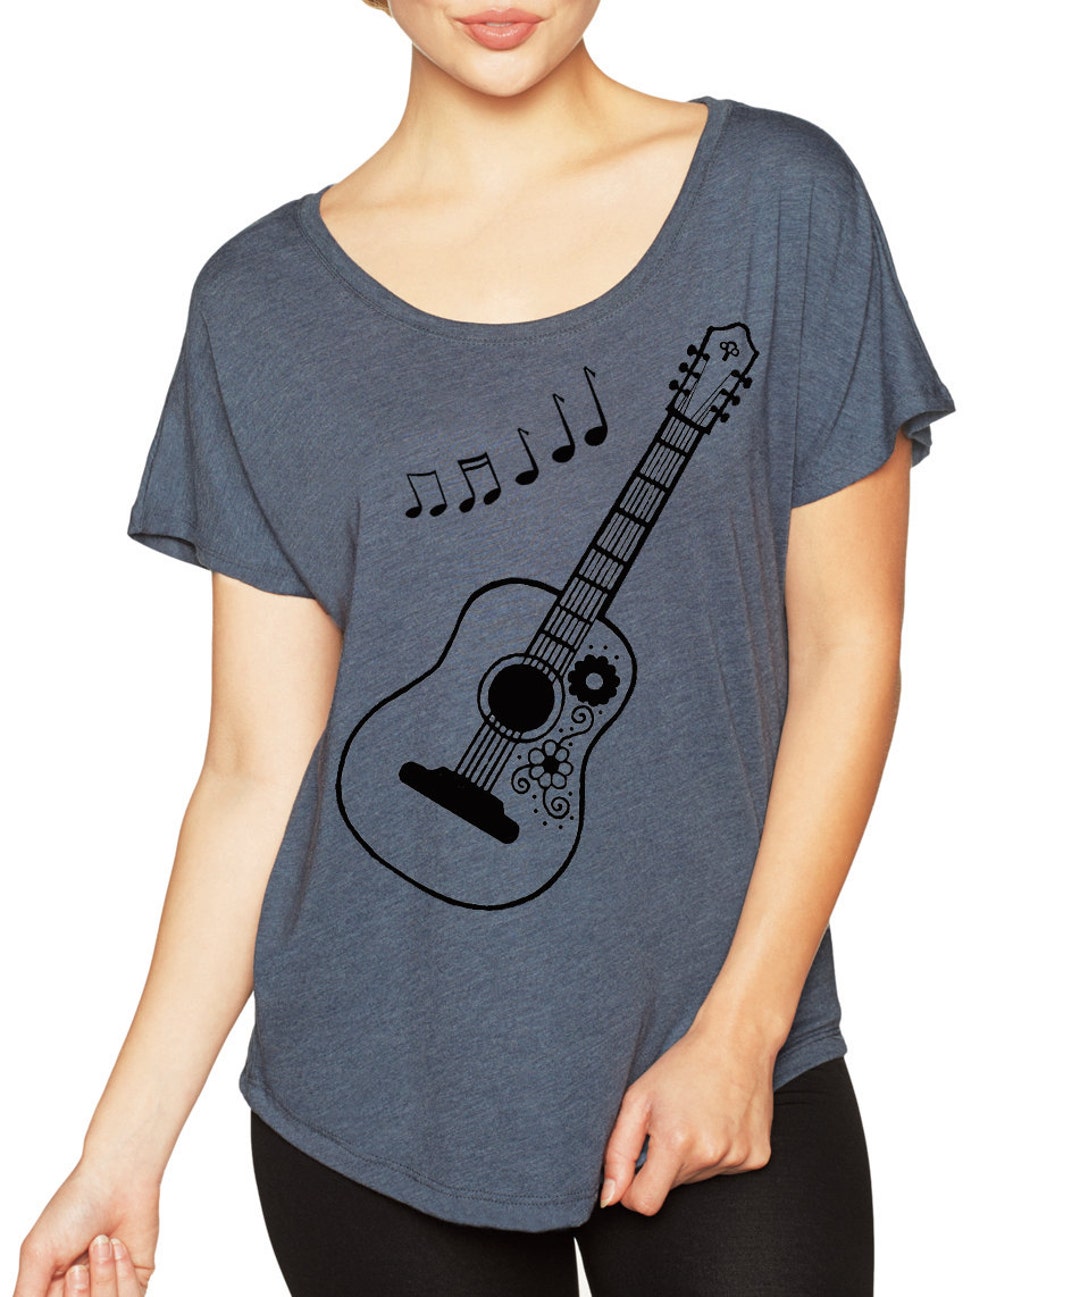 Acoustic GUITAR Music Notes Dolman Sleeve Loose Fit Tee Top Shirt ...